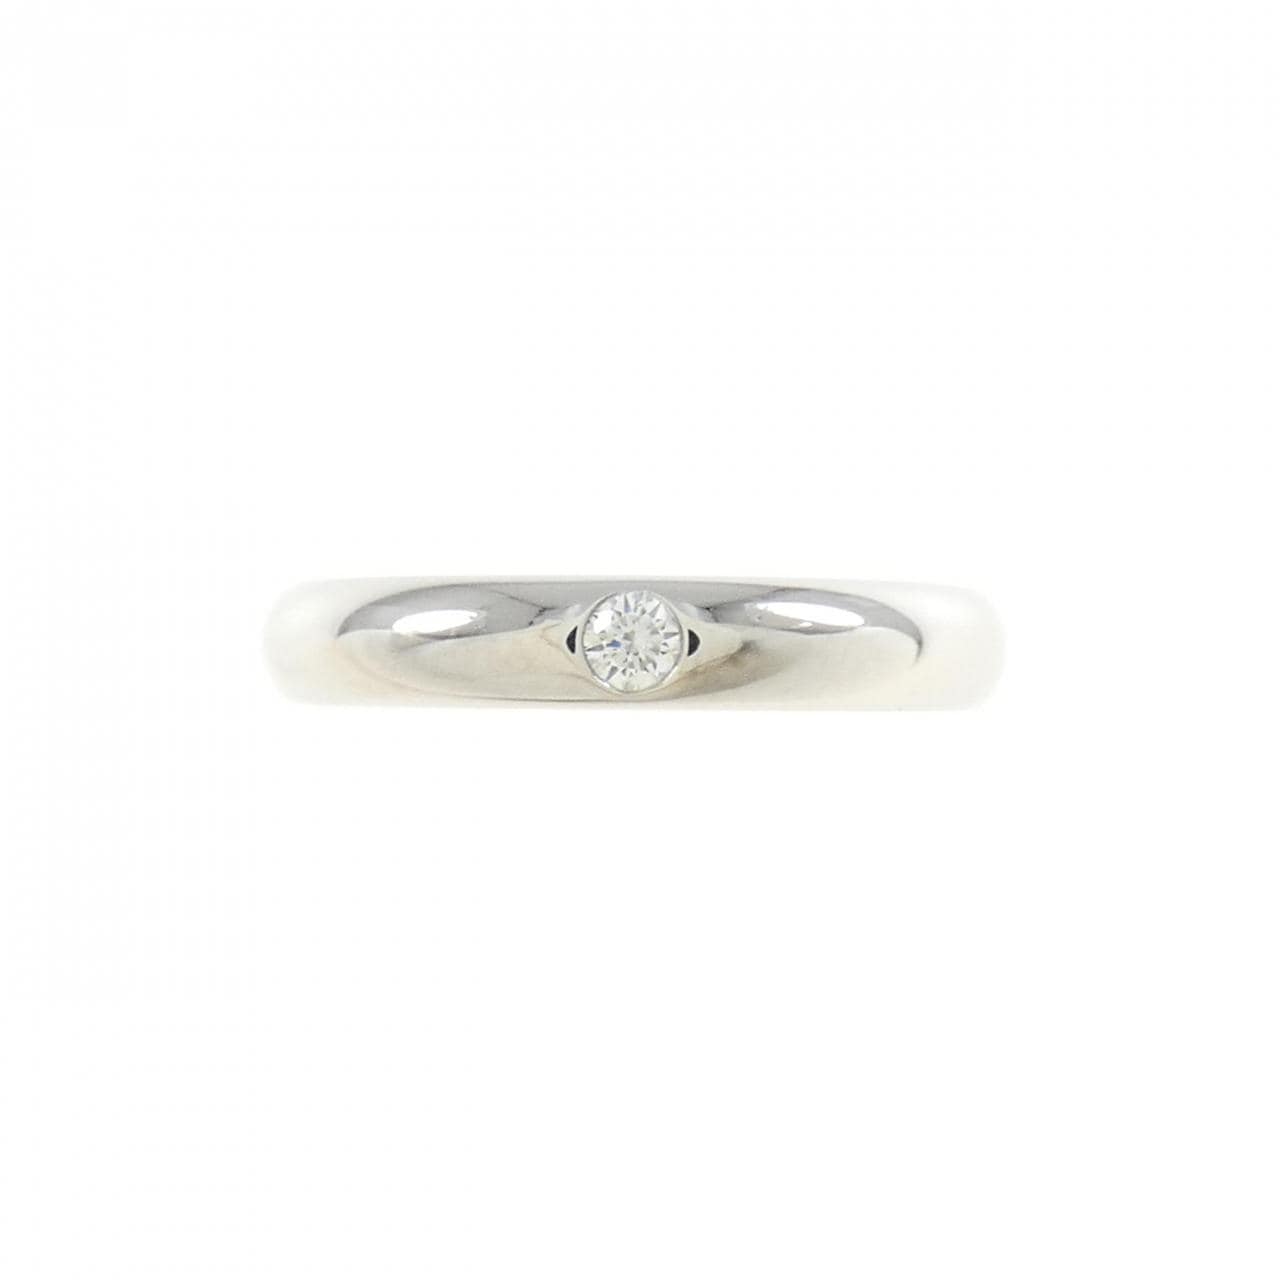 HARRY WINSTON Round Marriage Ring